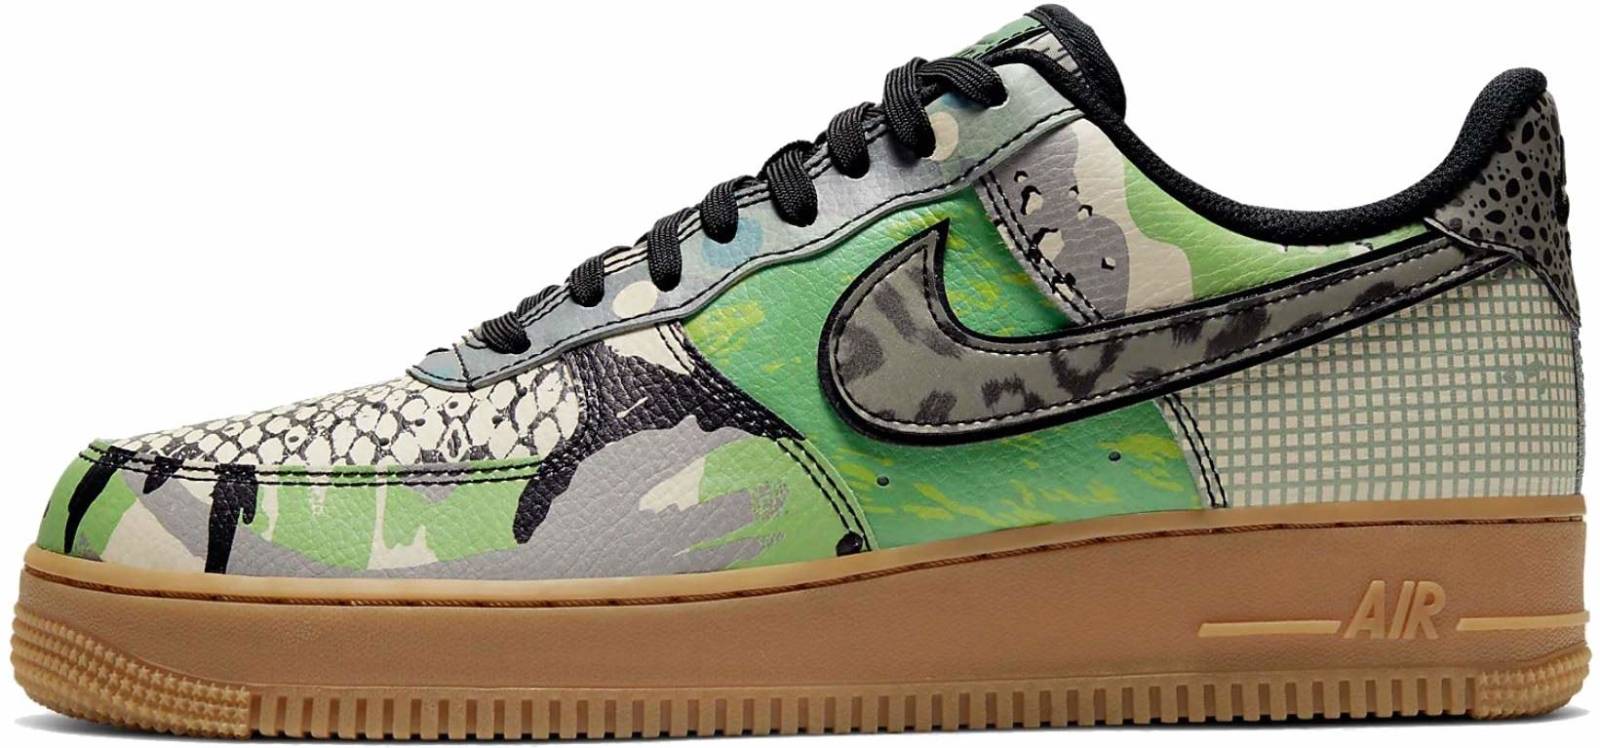 10+ Nike Air Force 1 07 sneakers: Save up to 26% | RunRepeat